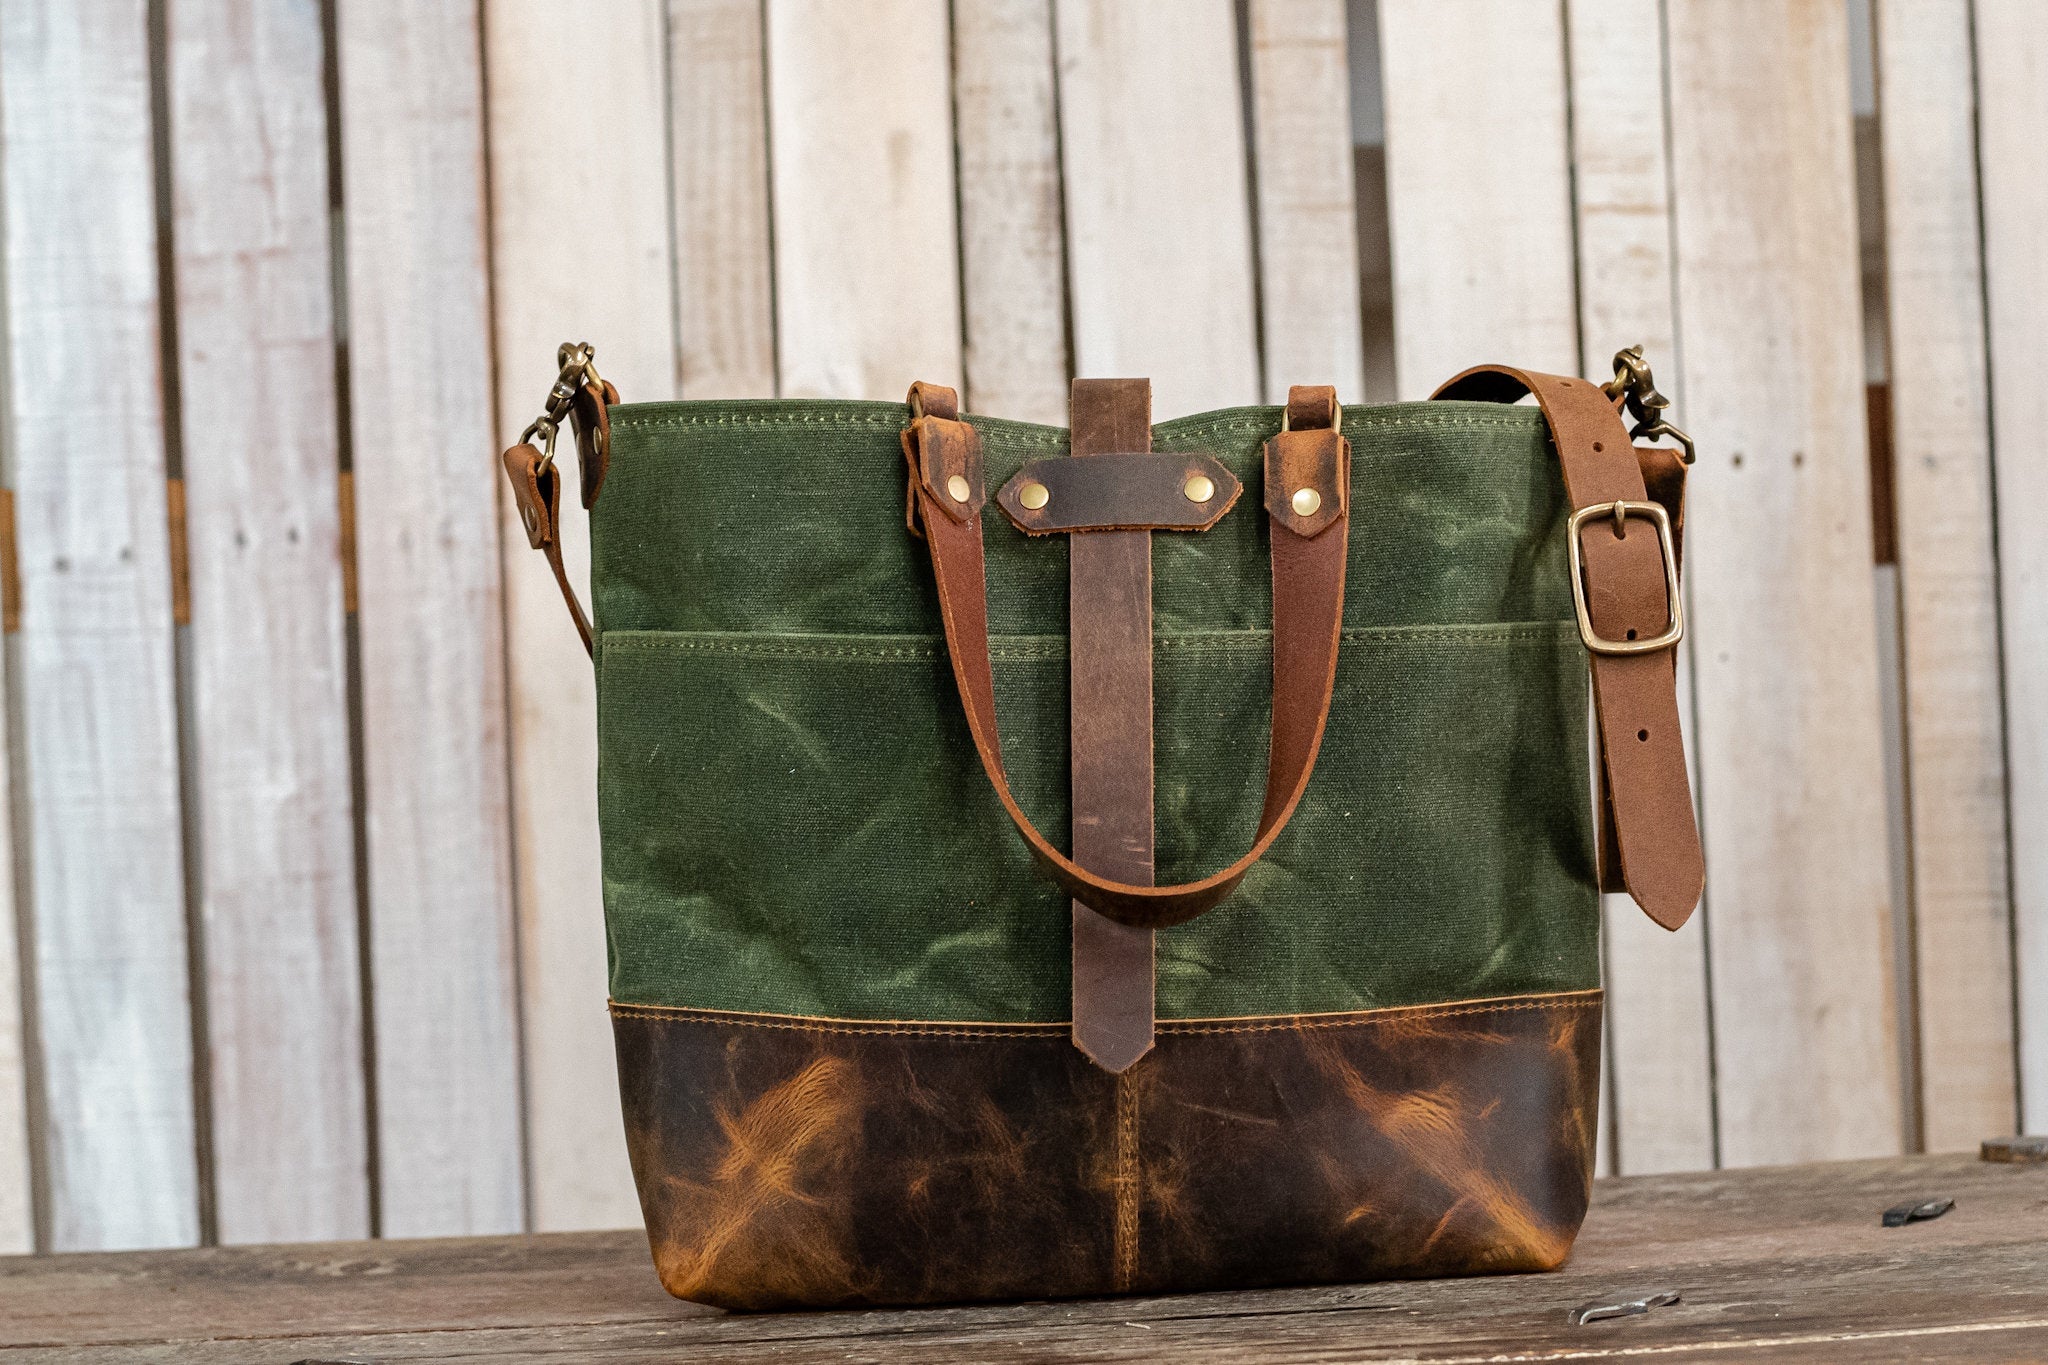 The ML Leather and Waxed Canvas Tote| Waxed Canvas Tote | Small to Medium Tote | Made in USA